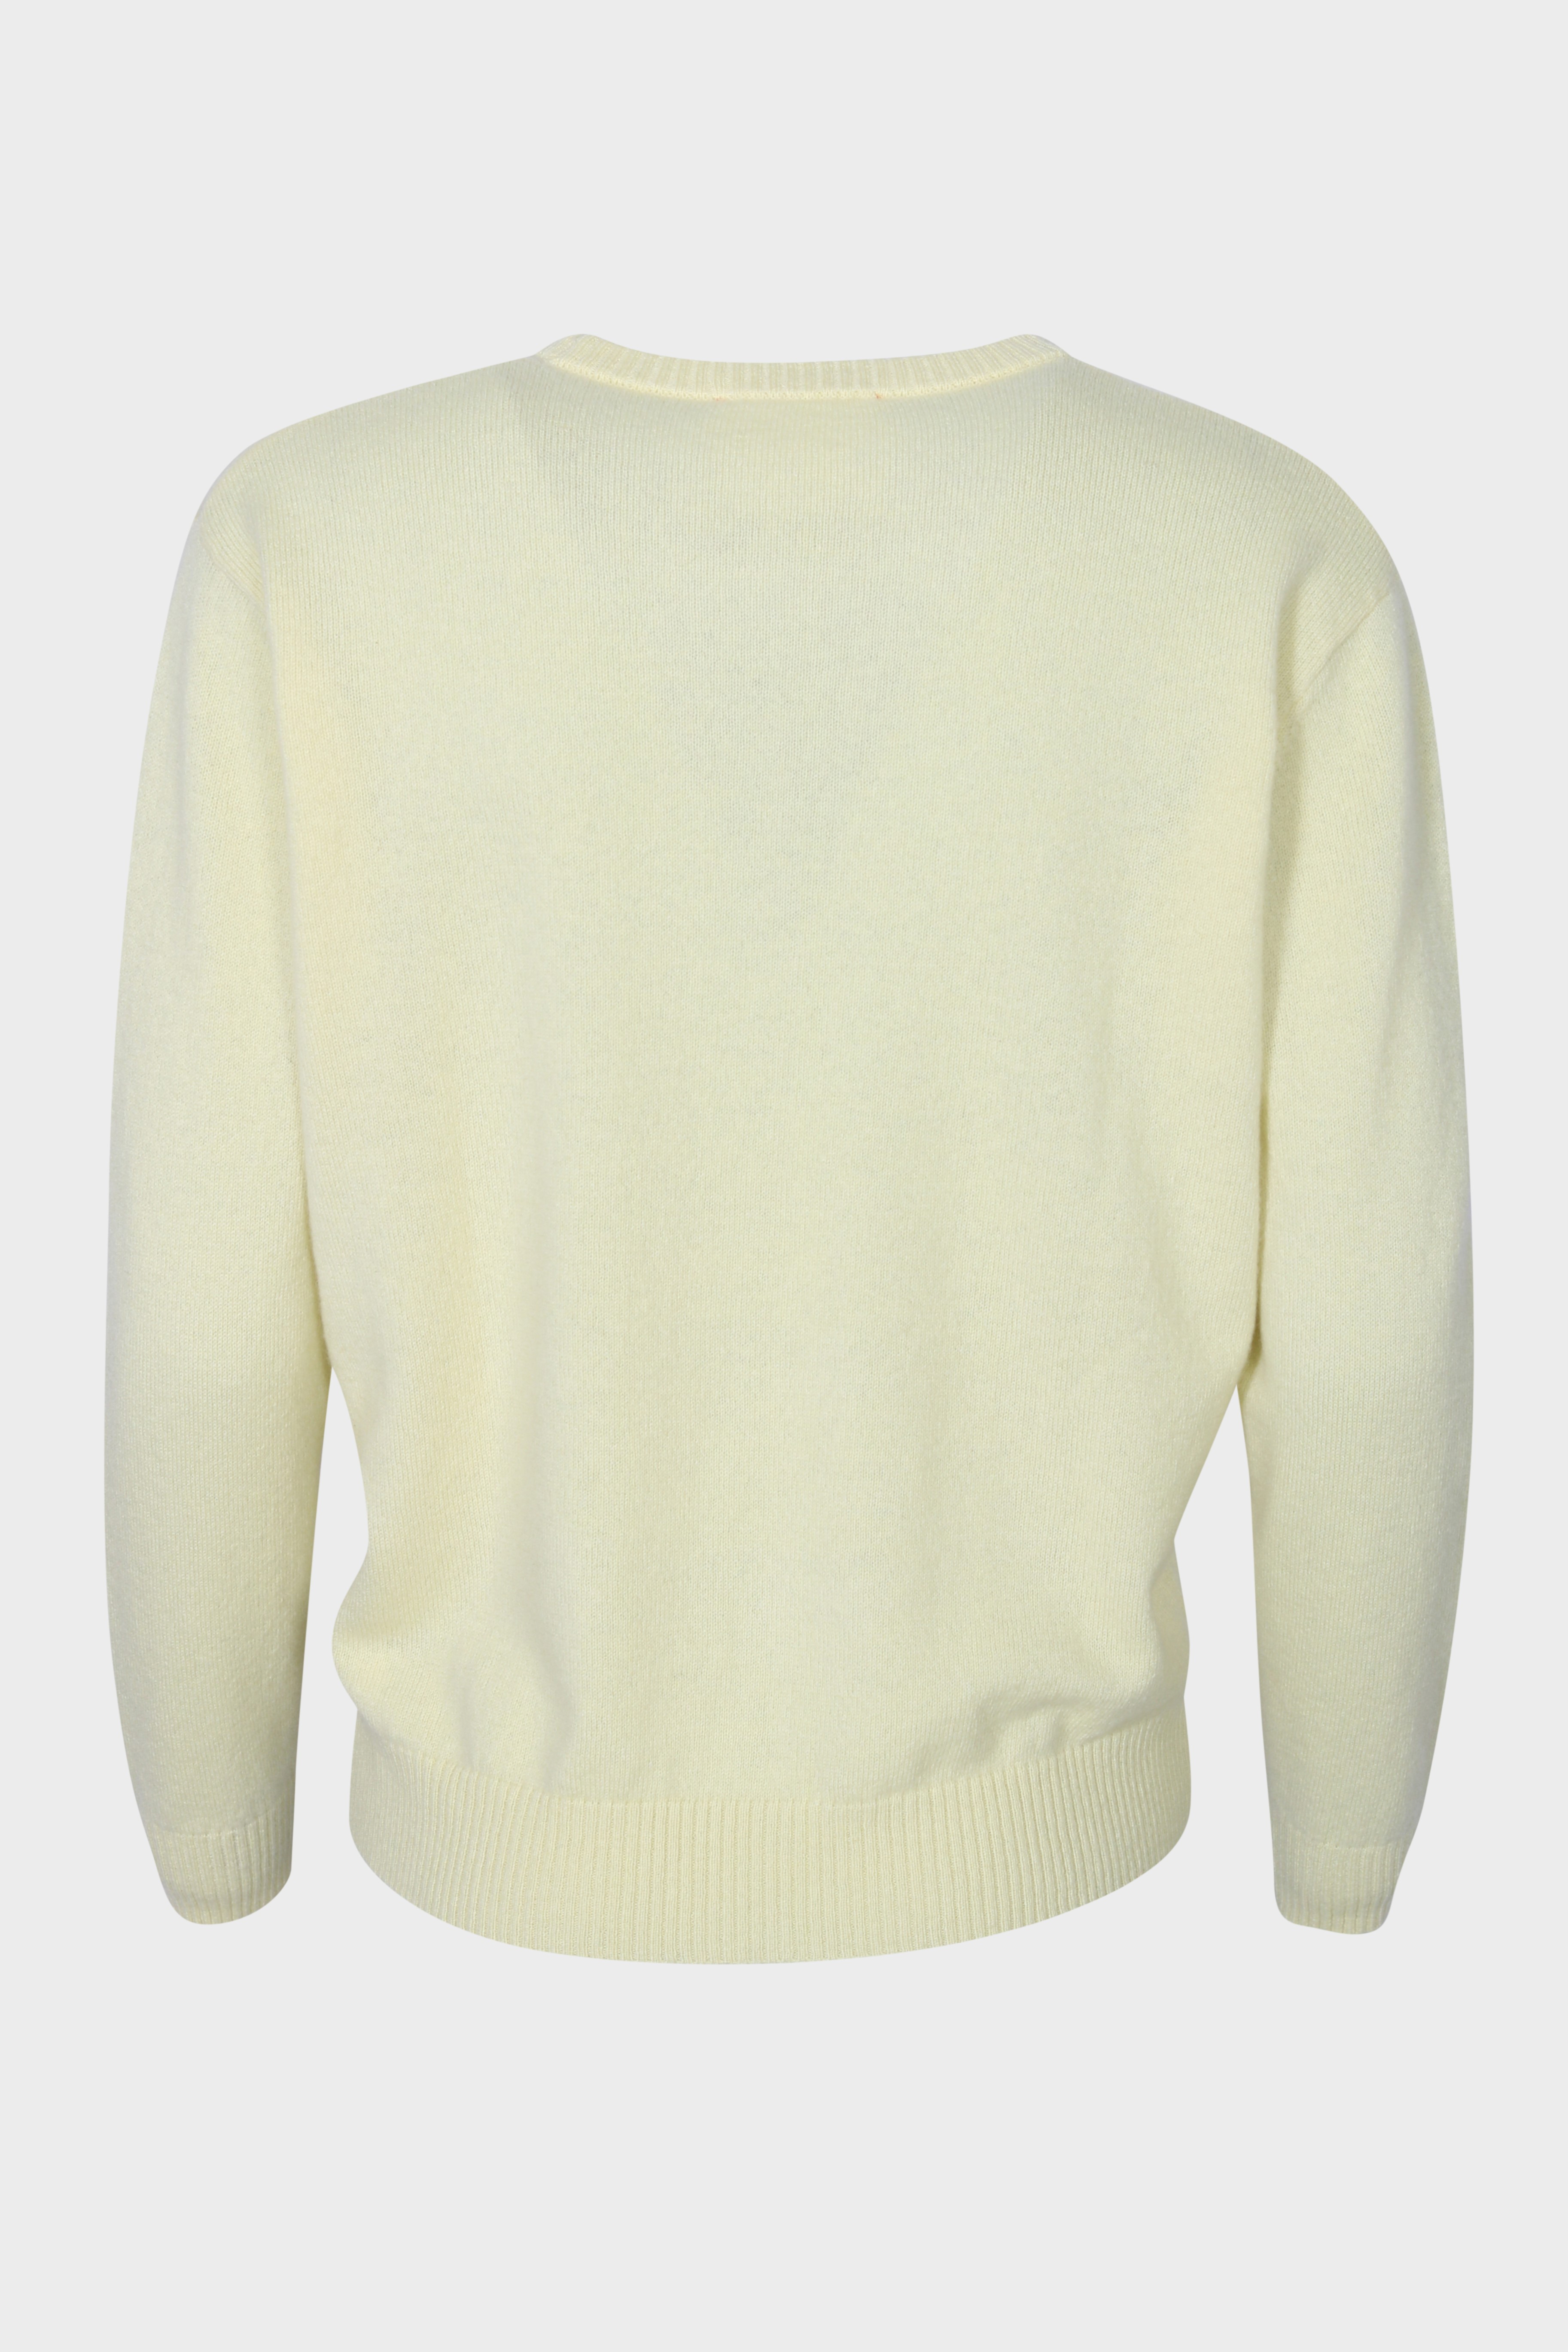 ABSOLUT CASHMERE Sweater Ysee Banana L